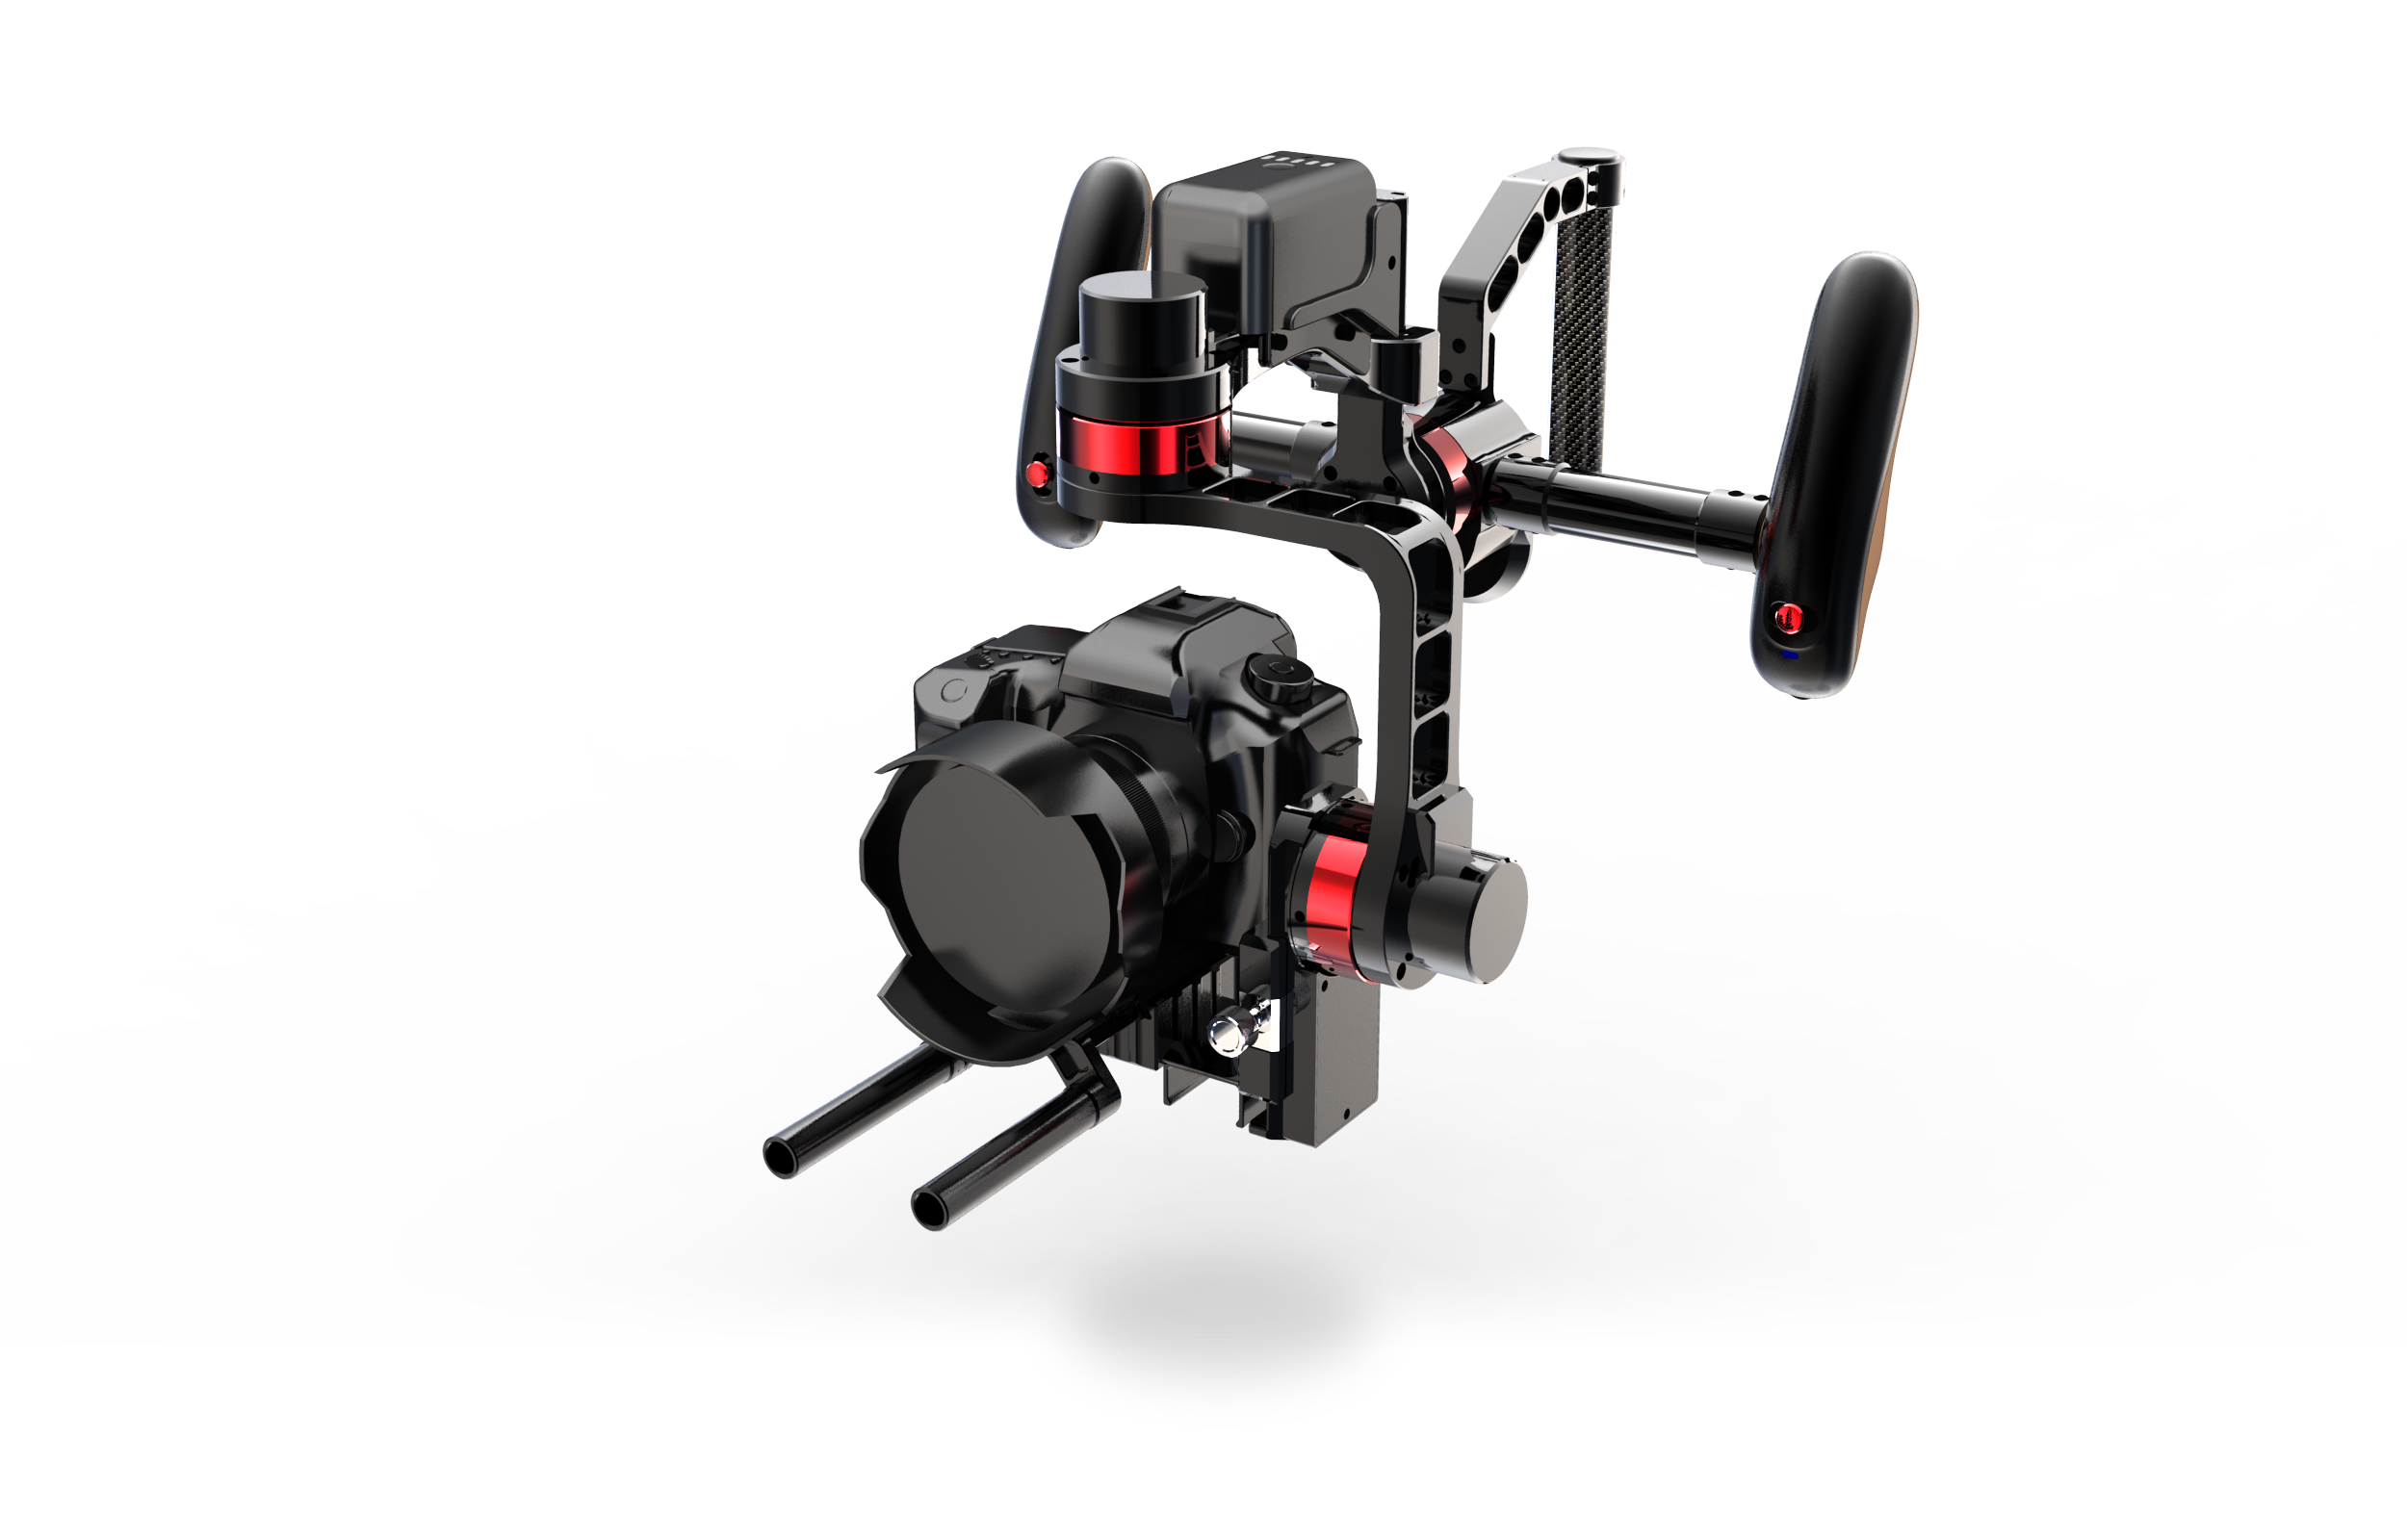 gimbal stabilizer for camera